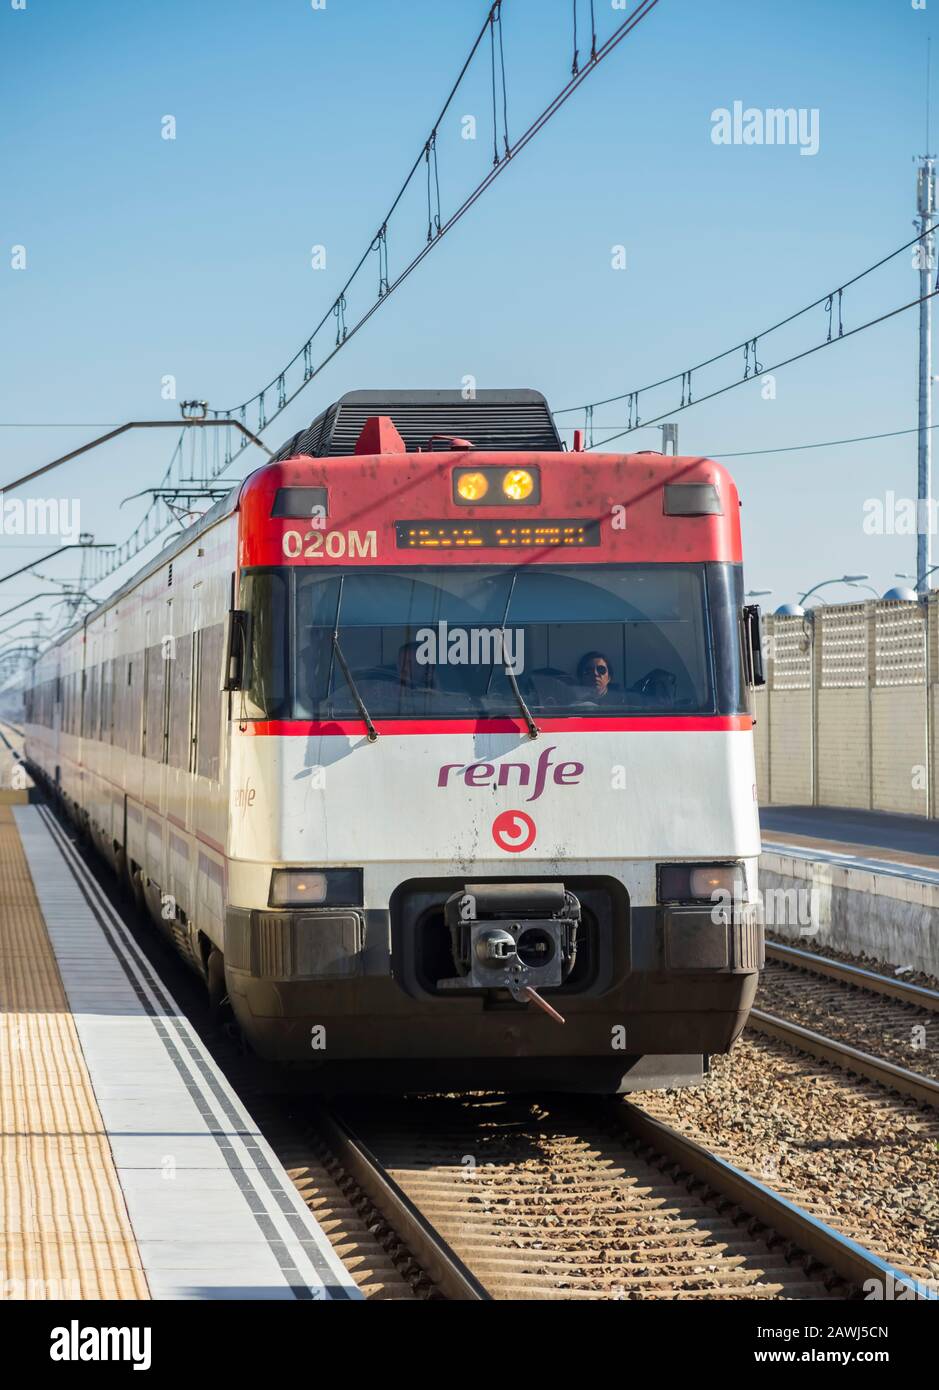 Alcala de Henares train station, Madrid province, Spain; Feb/25/2019; Trains passing by the station of Alcala de Henares, Madrid province, Spain Stock Photo